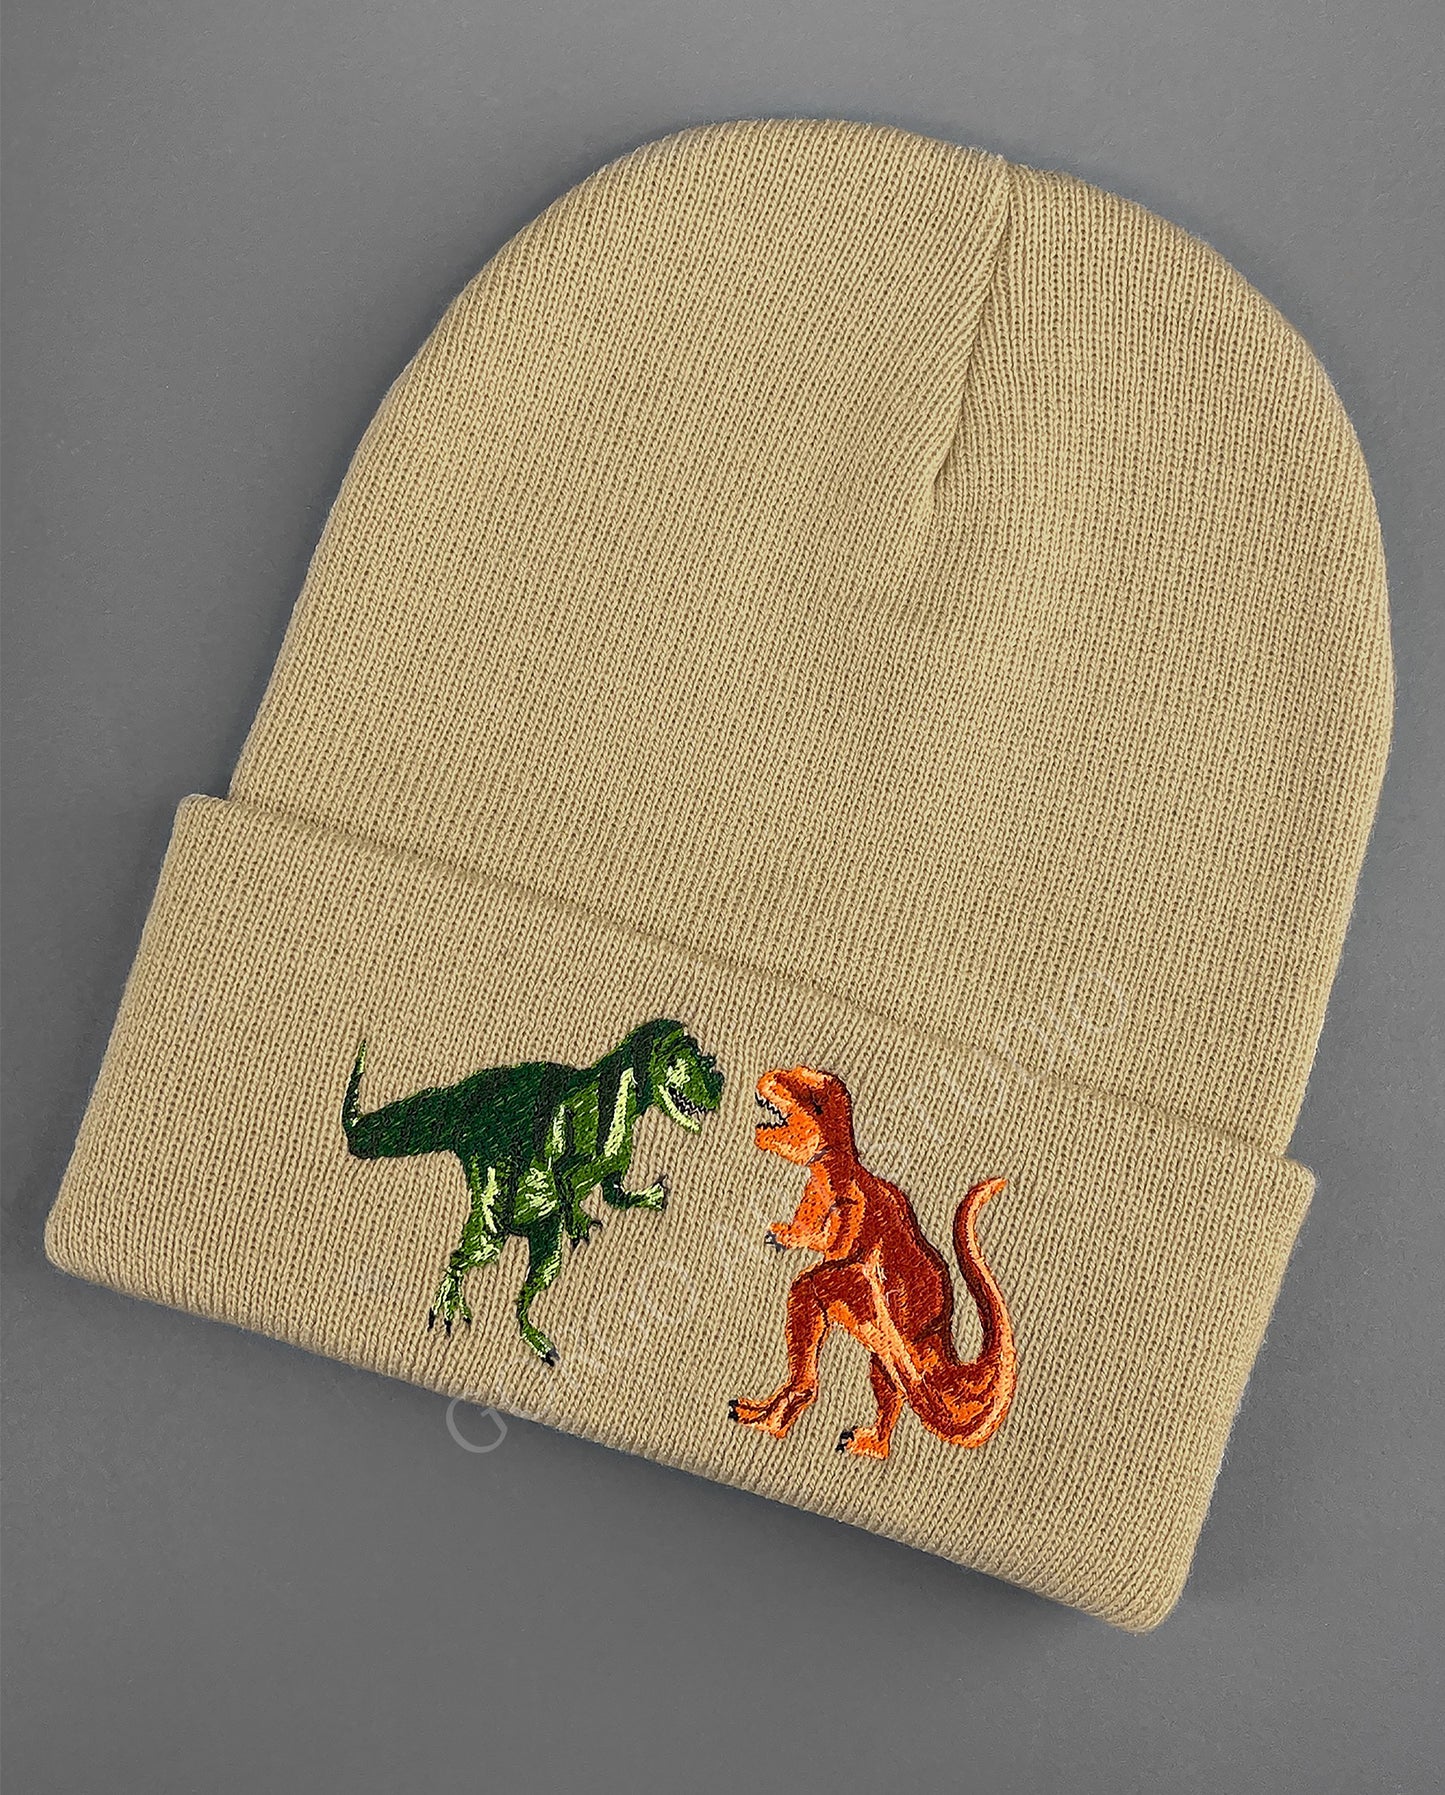 Dino embroidered beanie